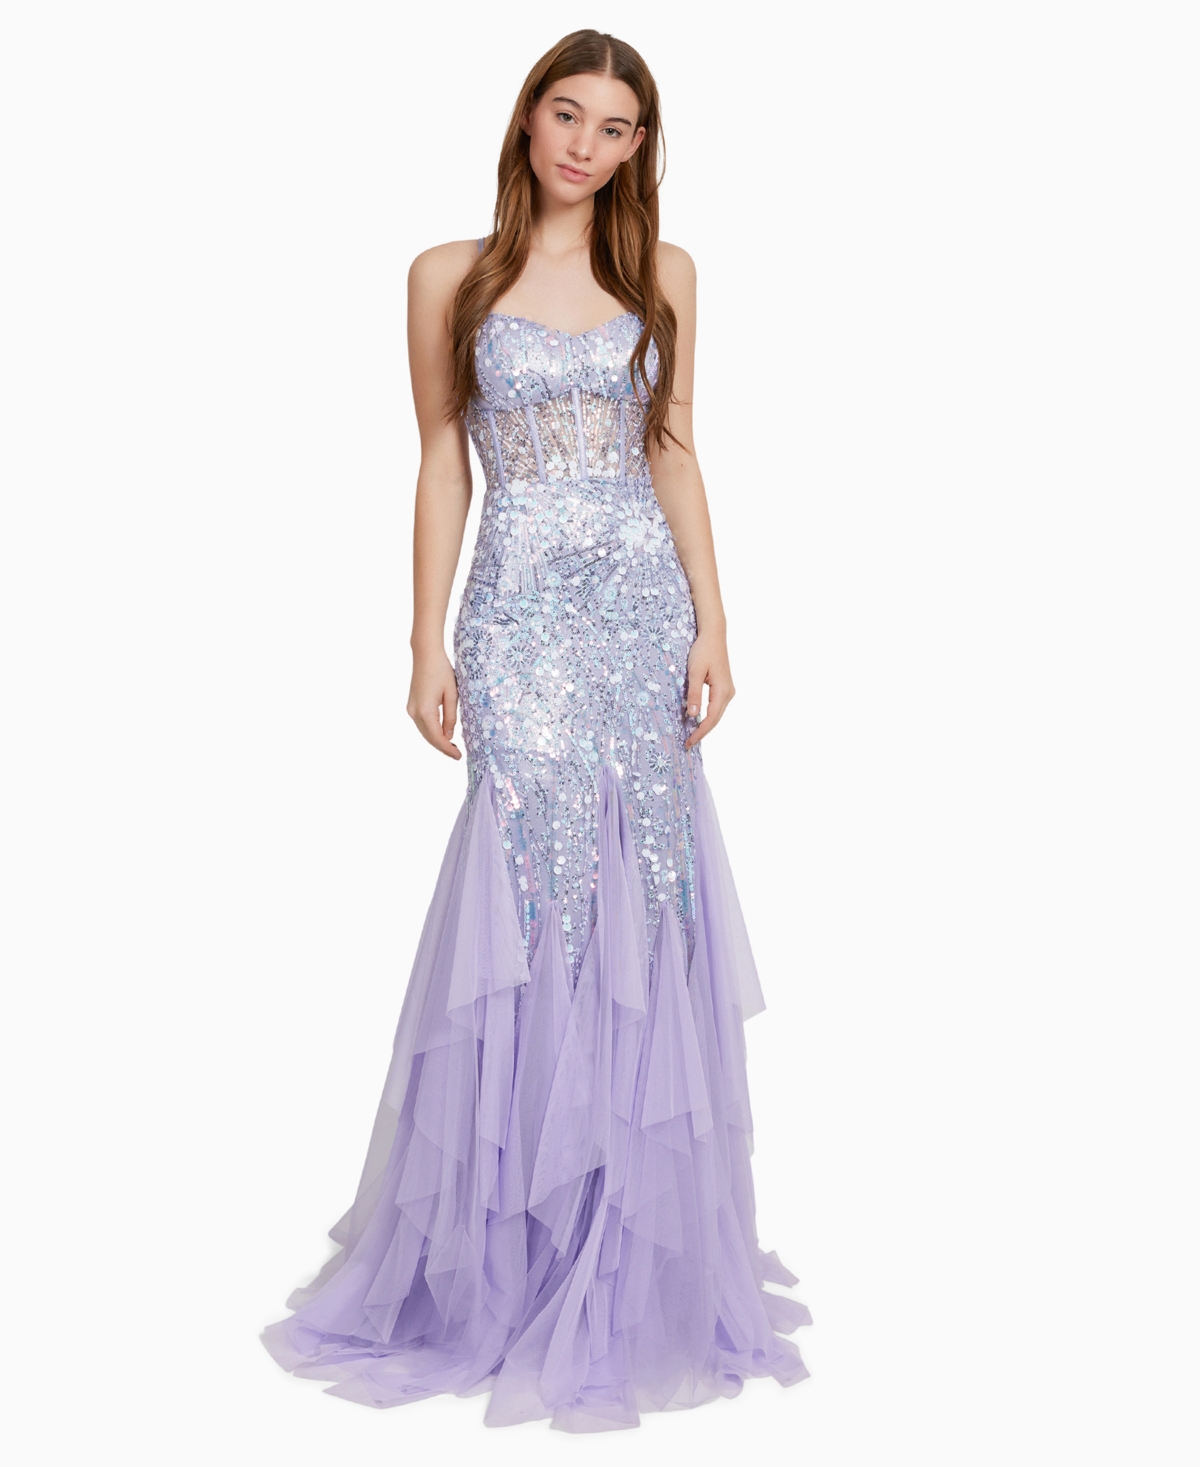 Juniors' Sequin Embellished Ruffle Trim Sleeveless Gown - Lilac